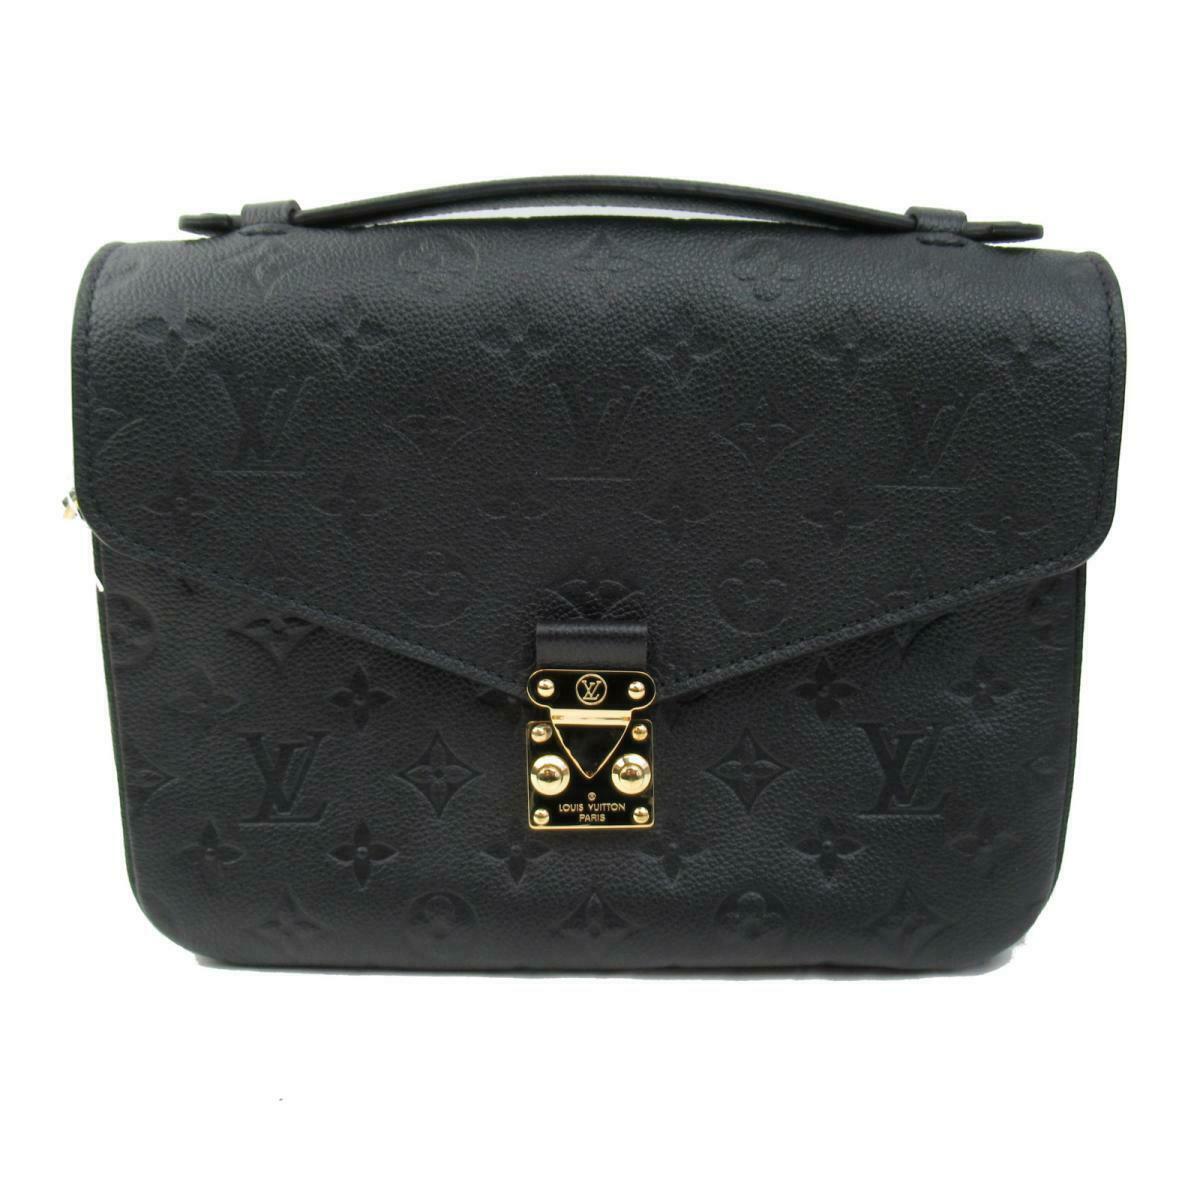 Top 10 Black Louis Vuitton Purses That Will Dress Up Any Outfit